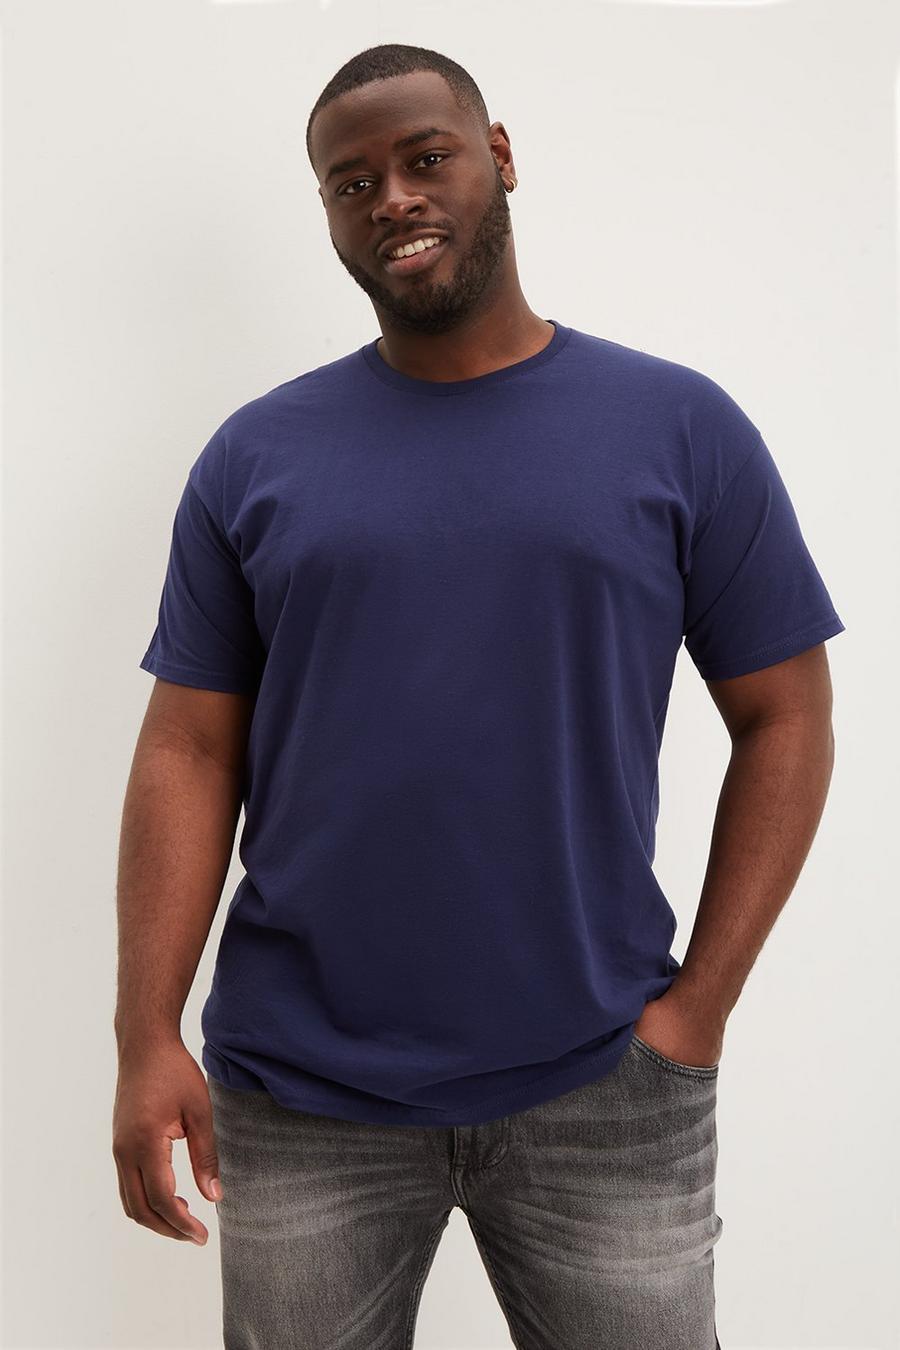 Plus And Tall Ss Basic Crew Tee